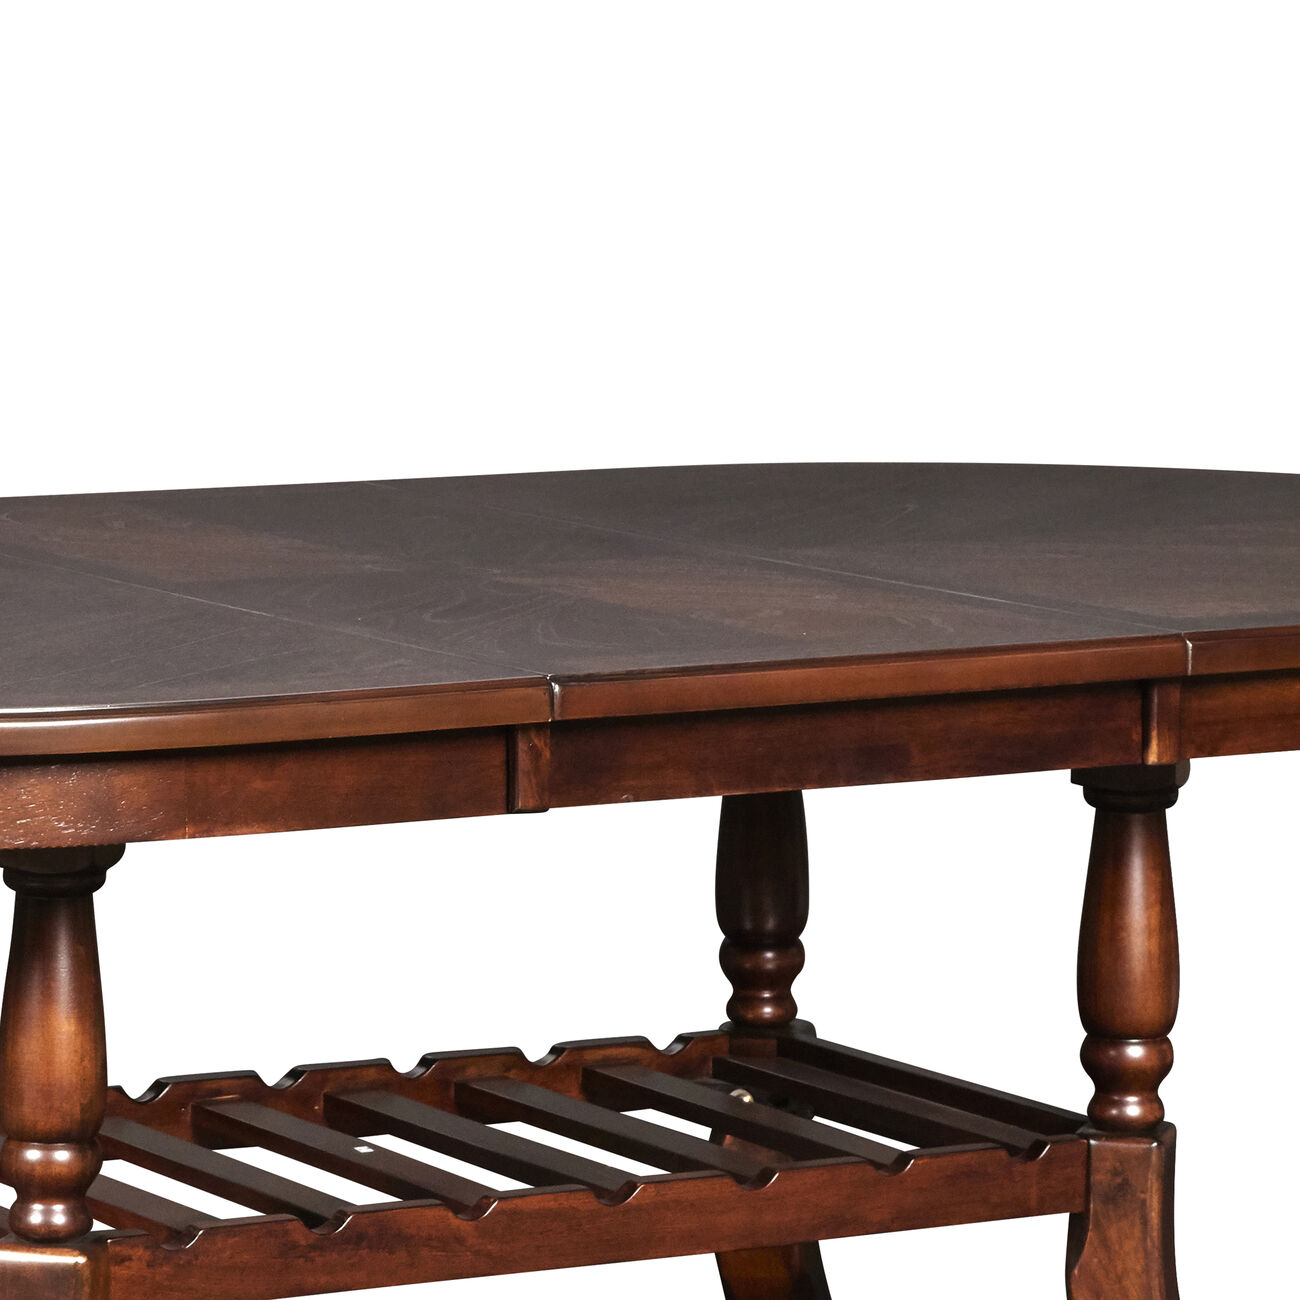 Wooden Oblong Top Extendable Dining Table with 2 Open Shelves, Brown